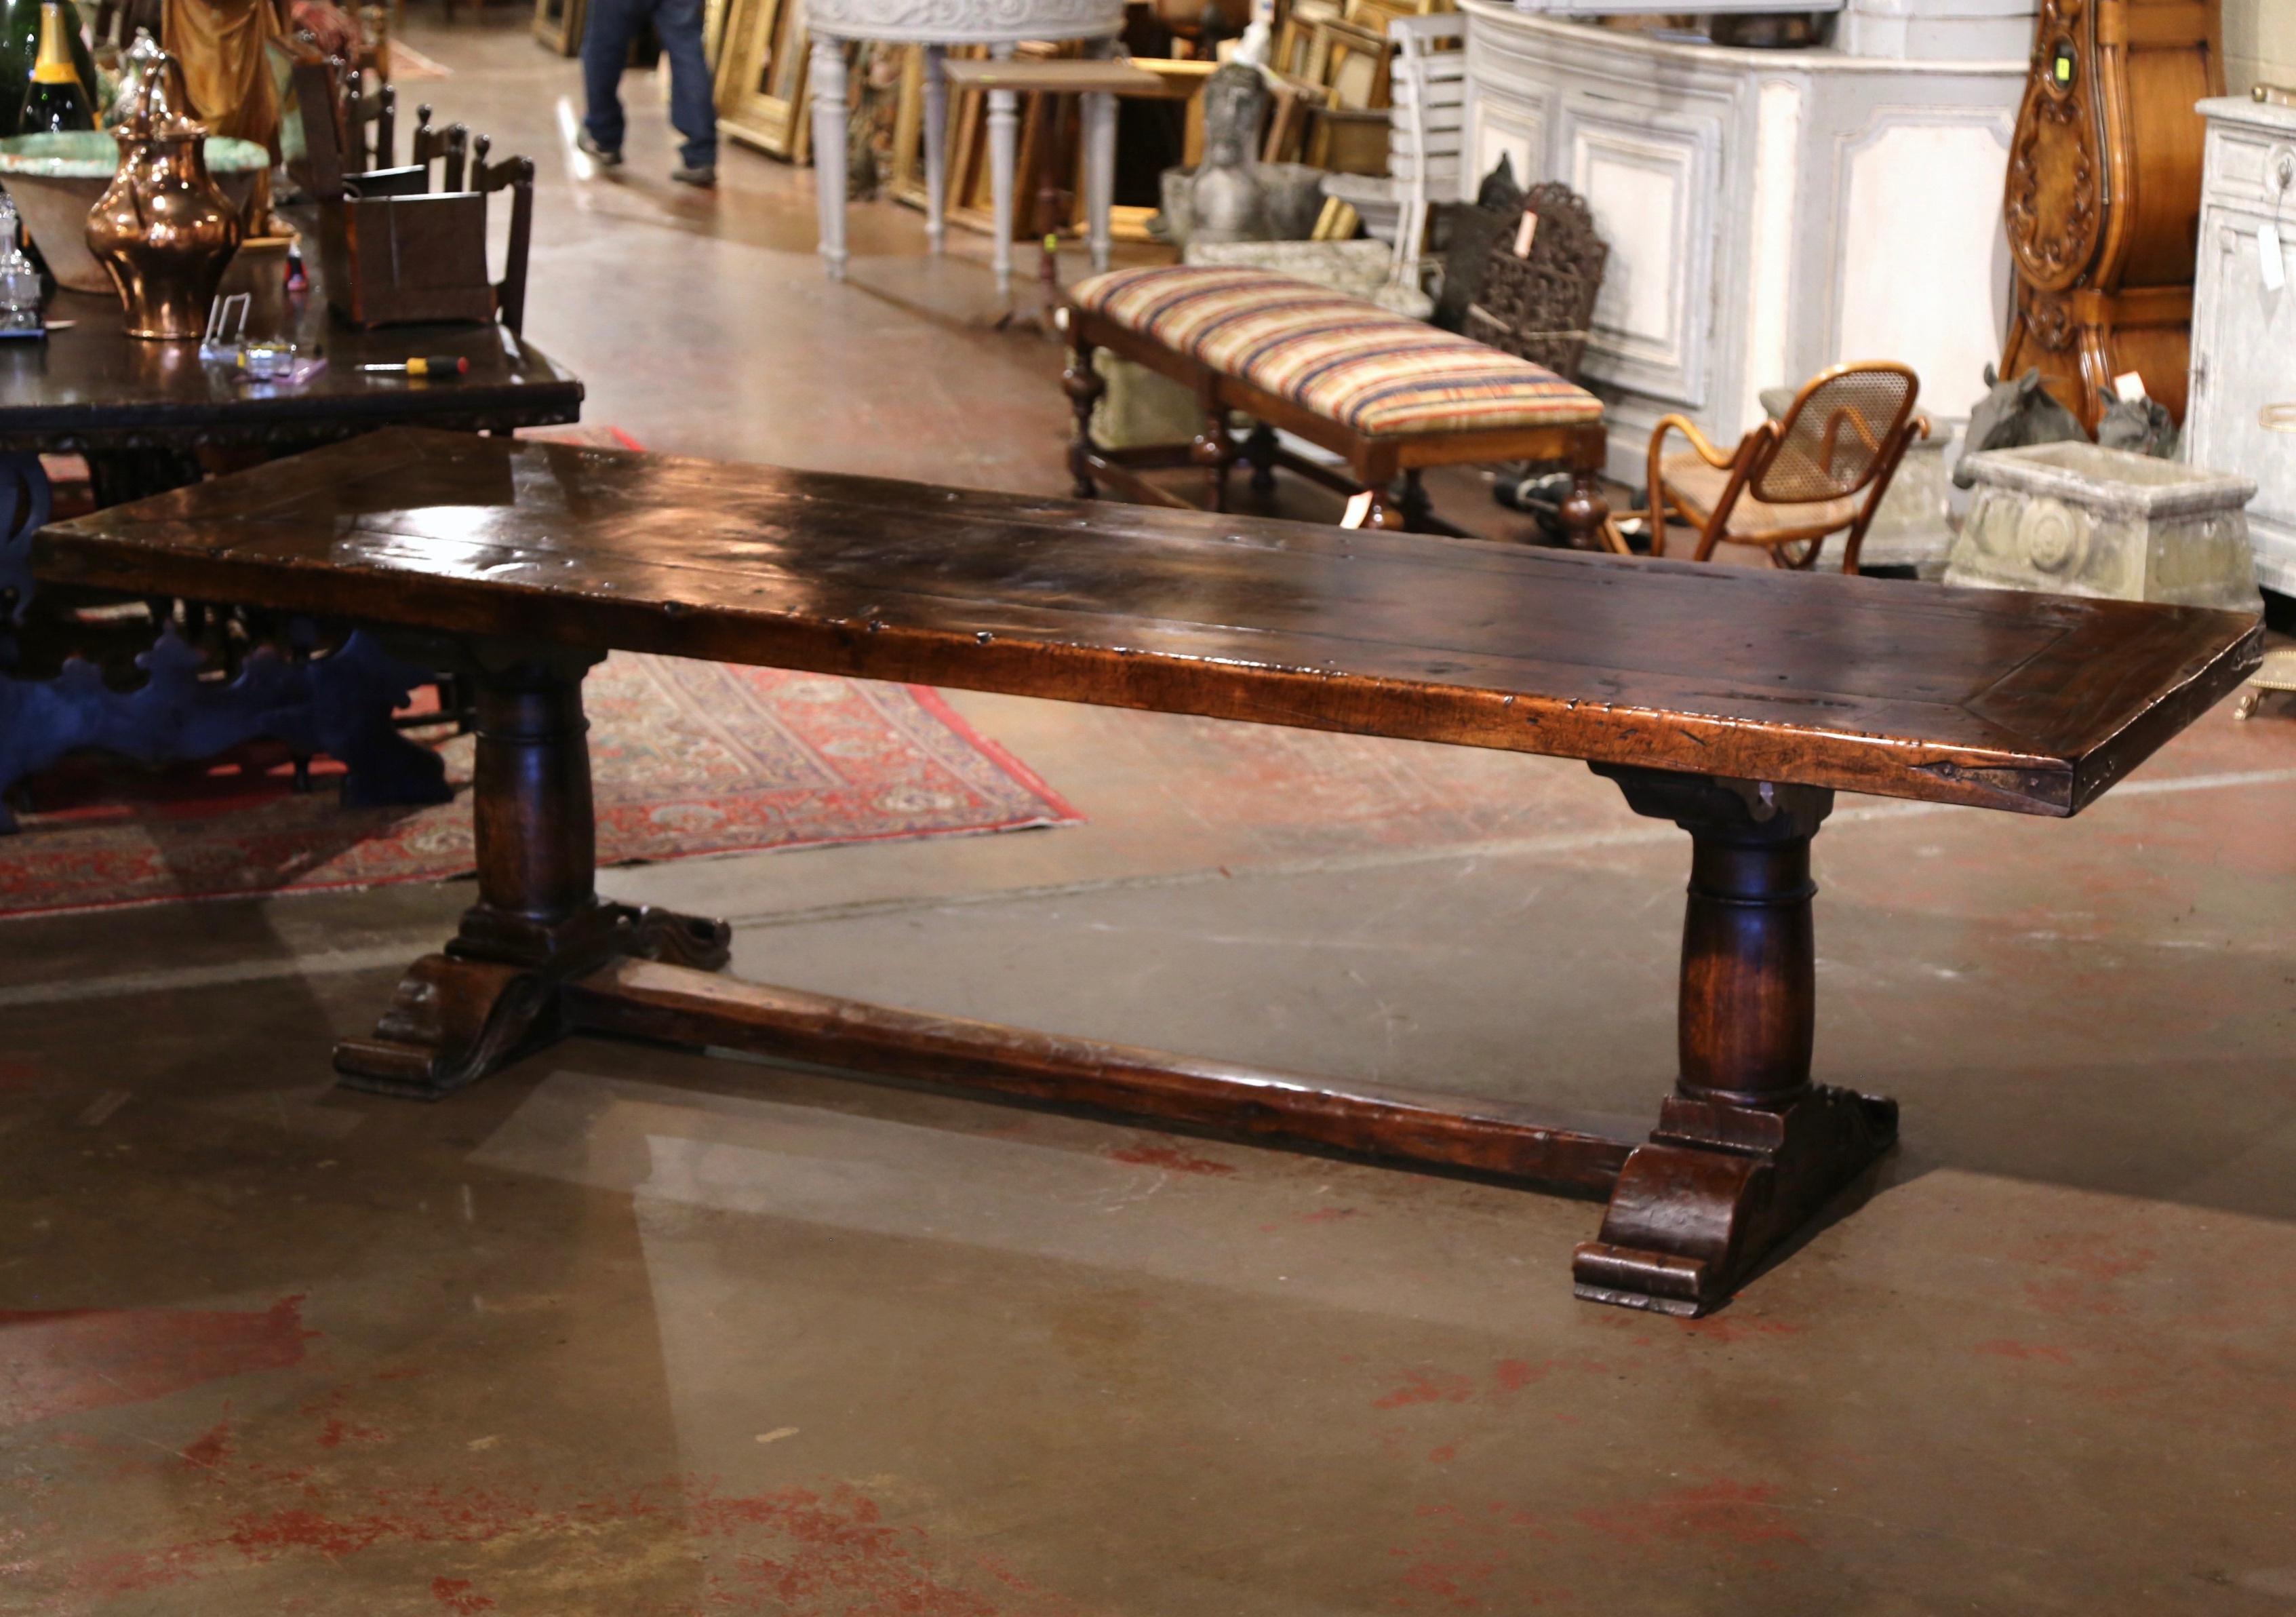 This large antique dining room table was crafted in southwest France, near the Spanish and French border circa 1880. Built with walnut and chestnut timber, the 9 foot table stands on hand carved baluster legs ending with shoe base, and connected